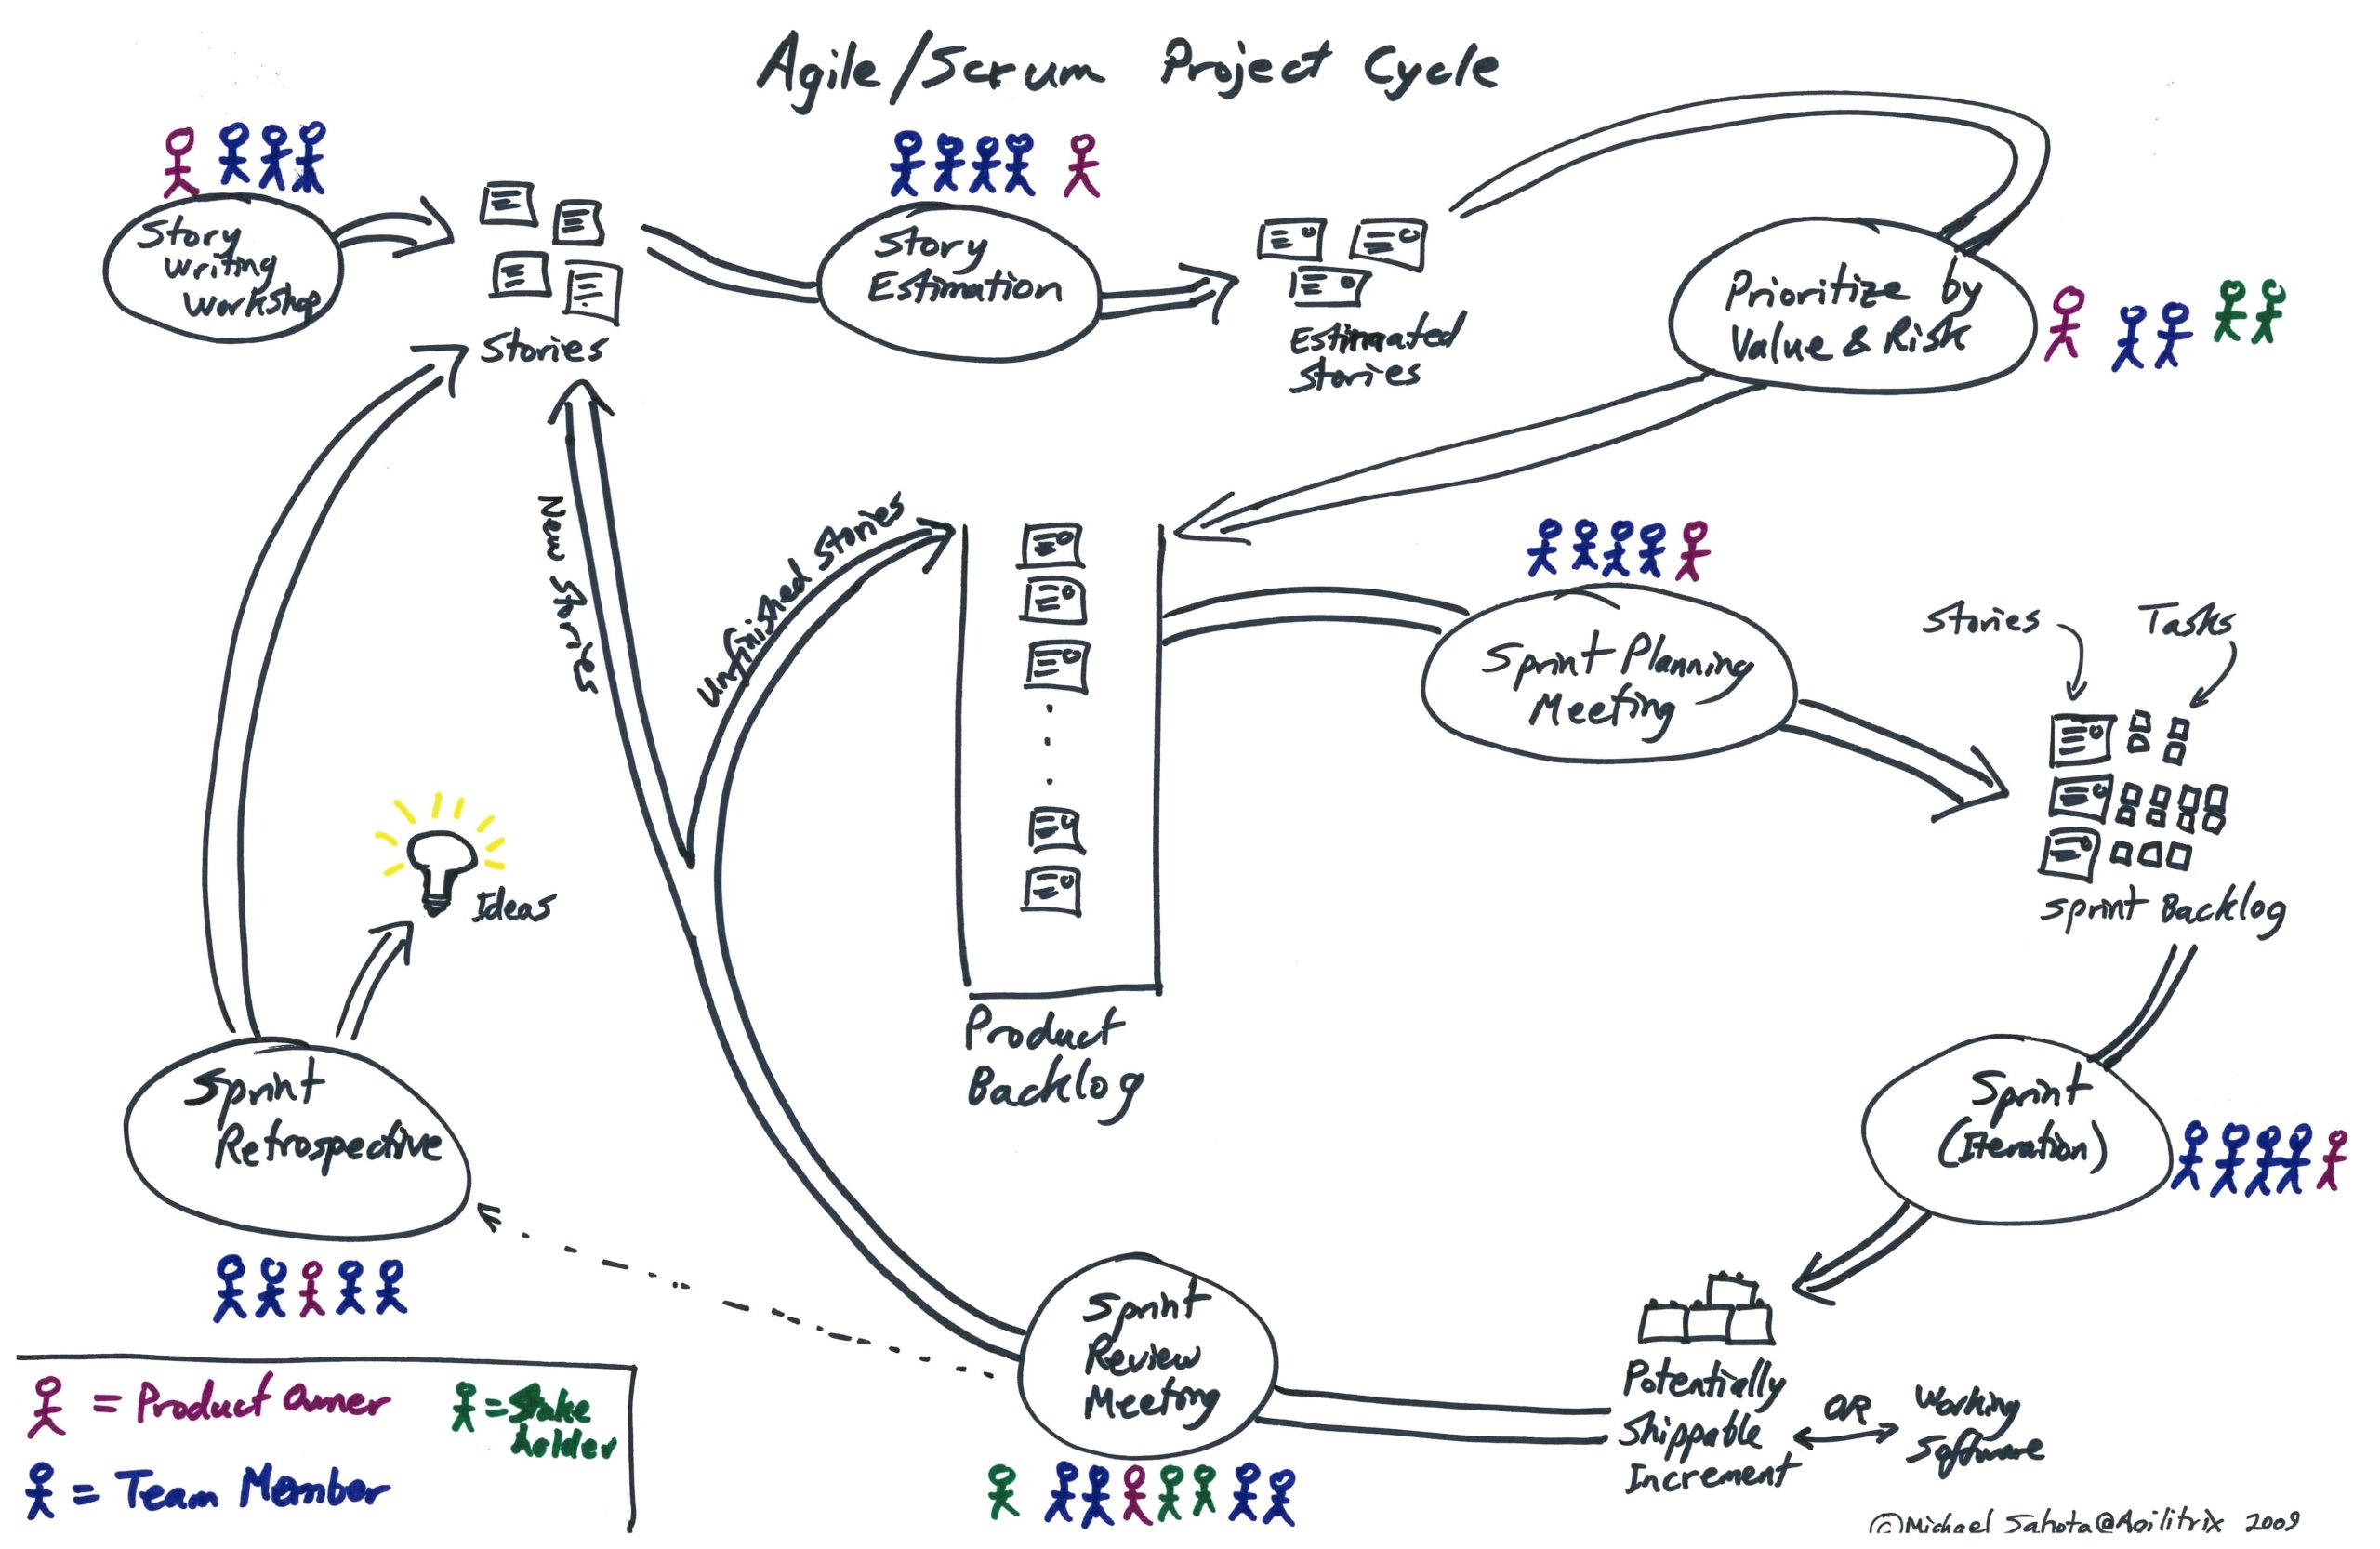 Scrum Project Cycle illustration